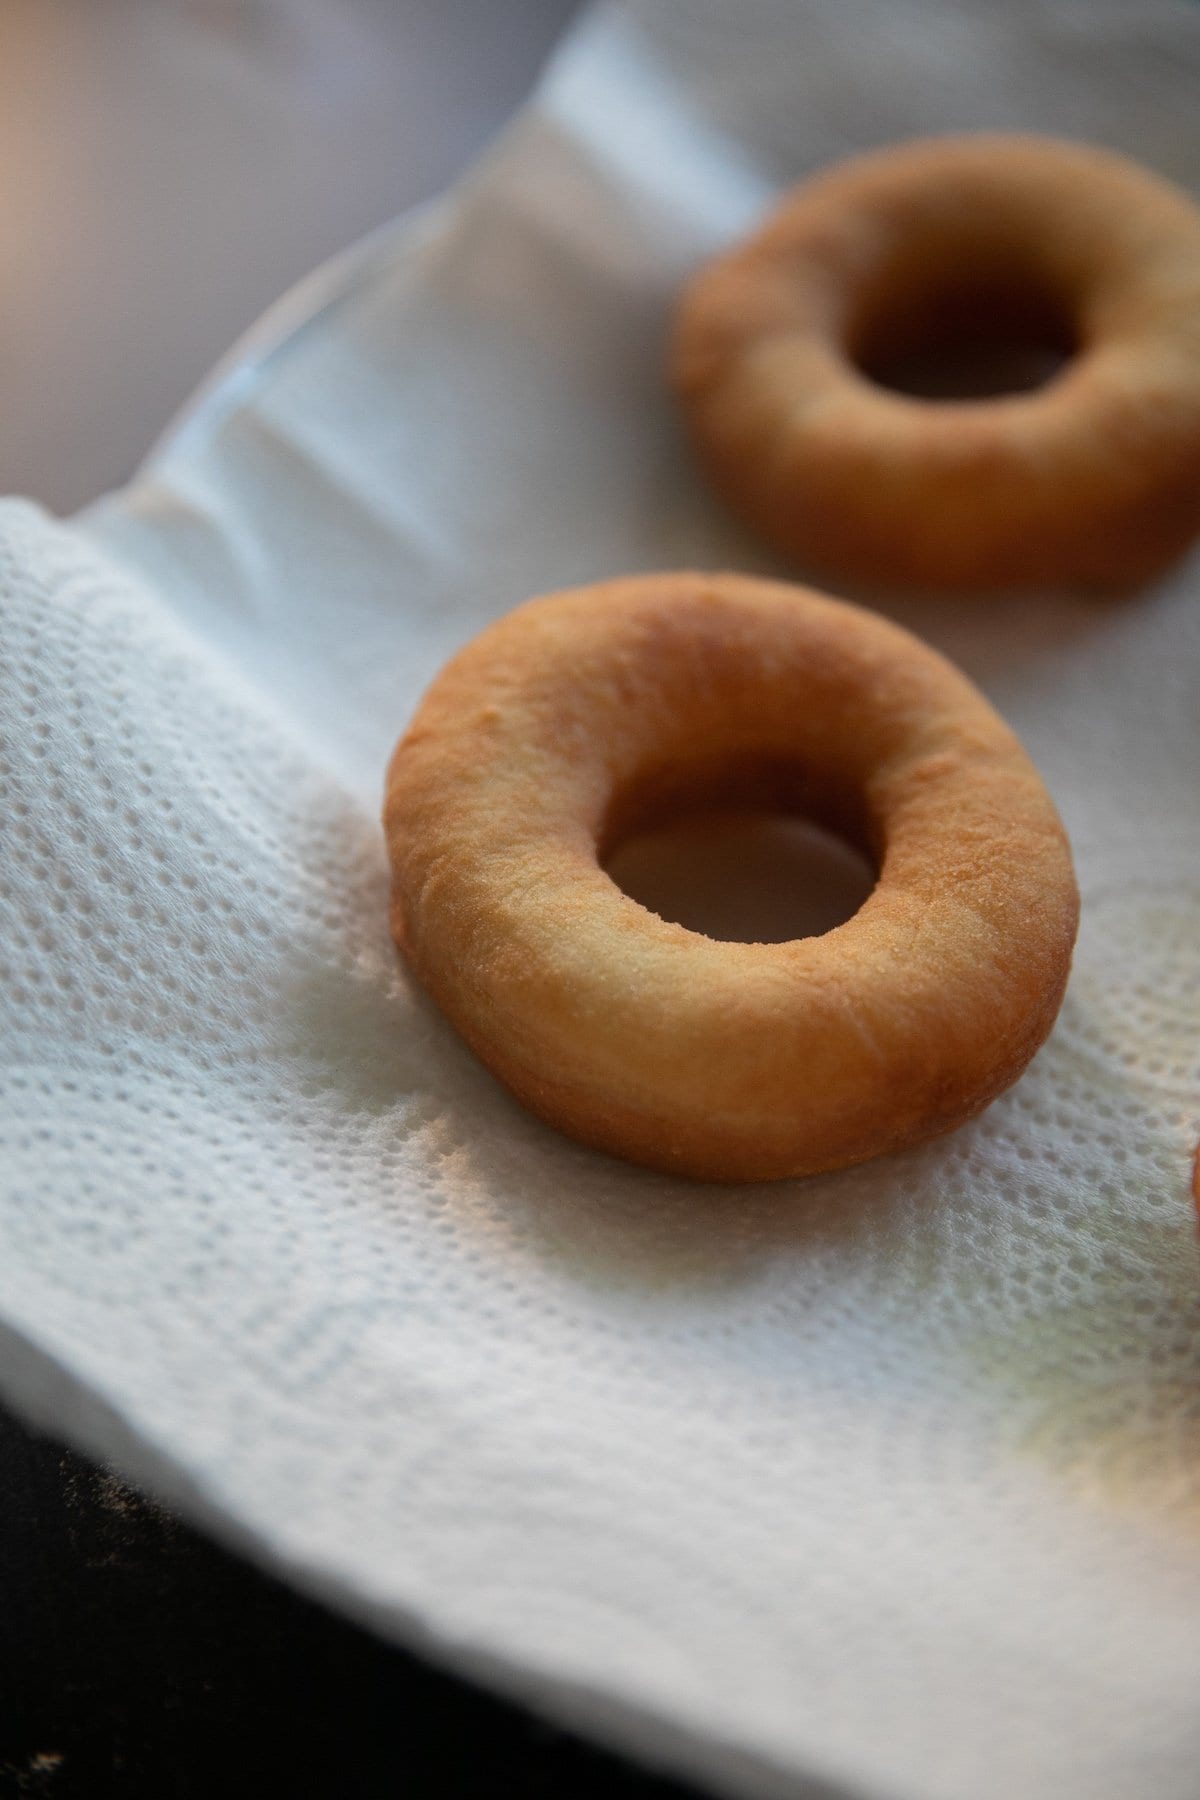 fried donut on a paper towel